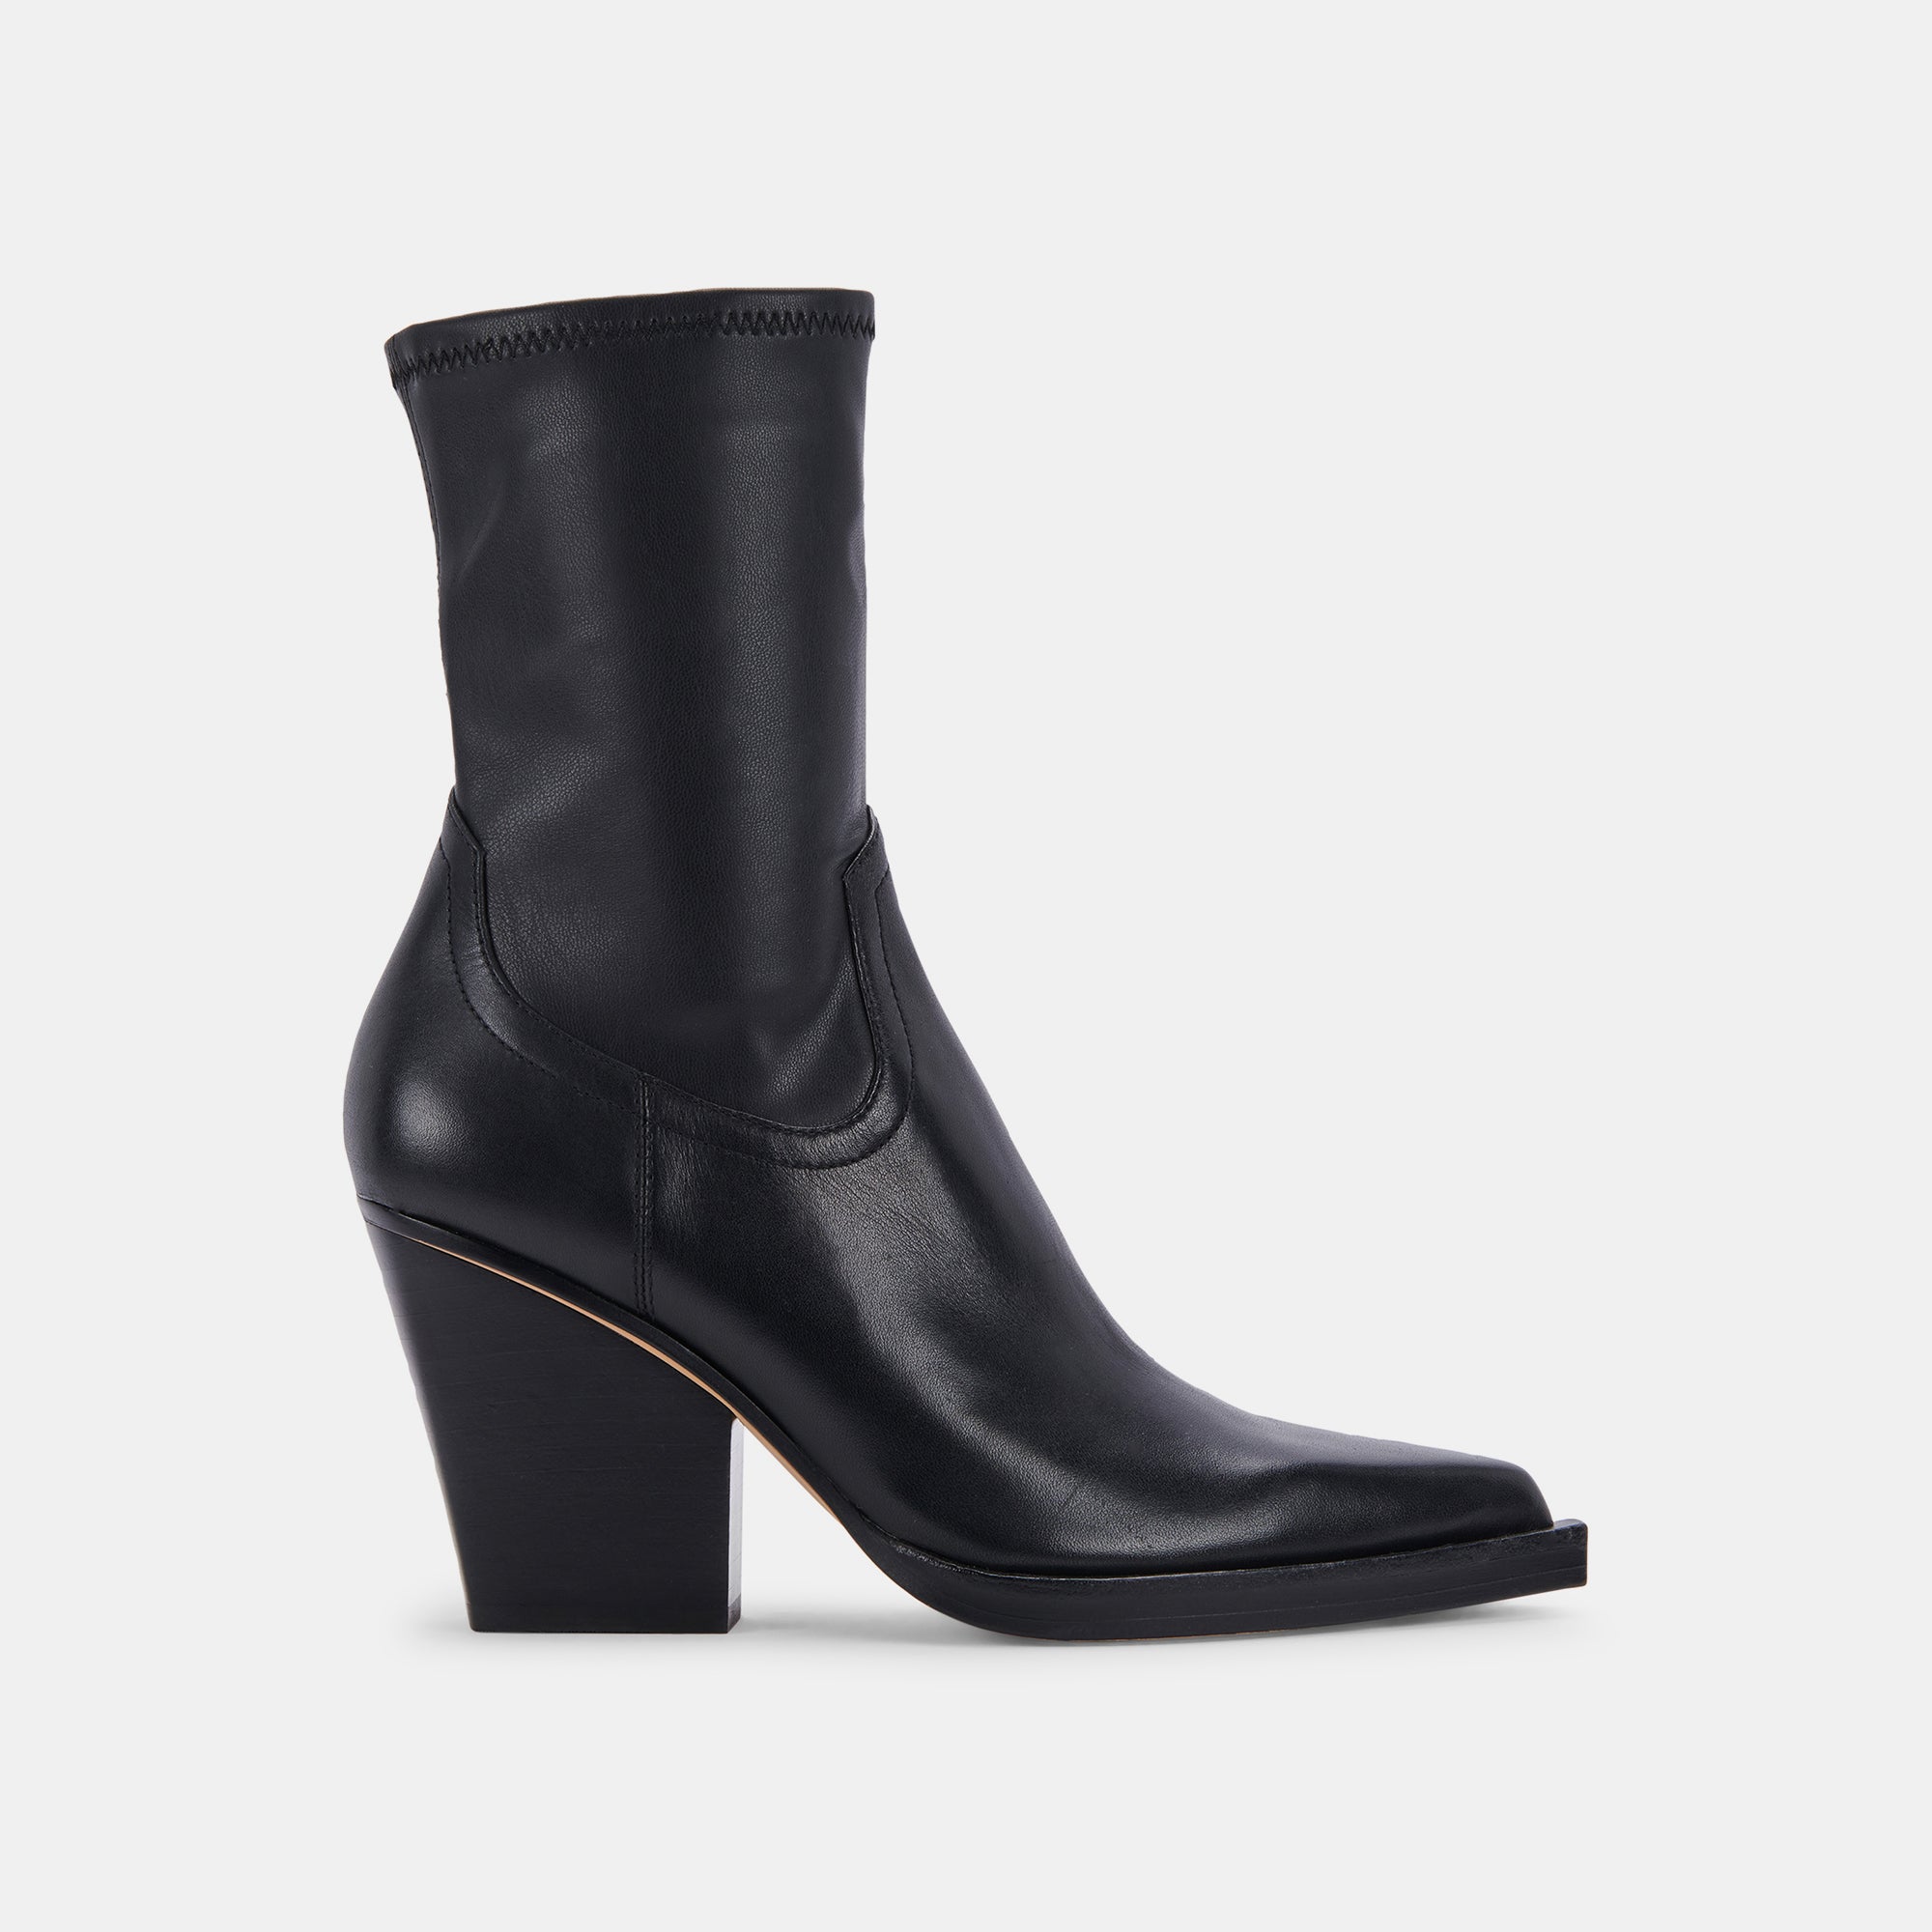 BOYD BOOTS BLACK LEATHER – Dolce Vita